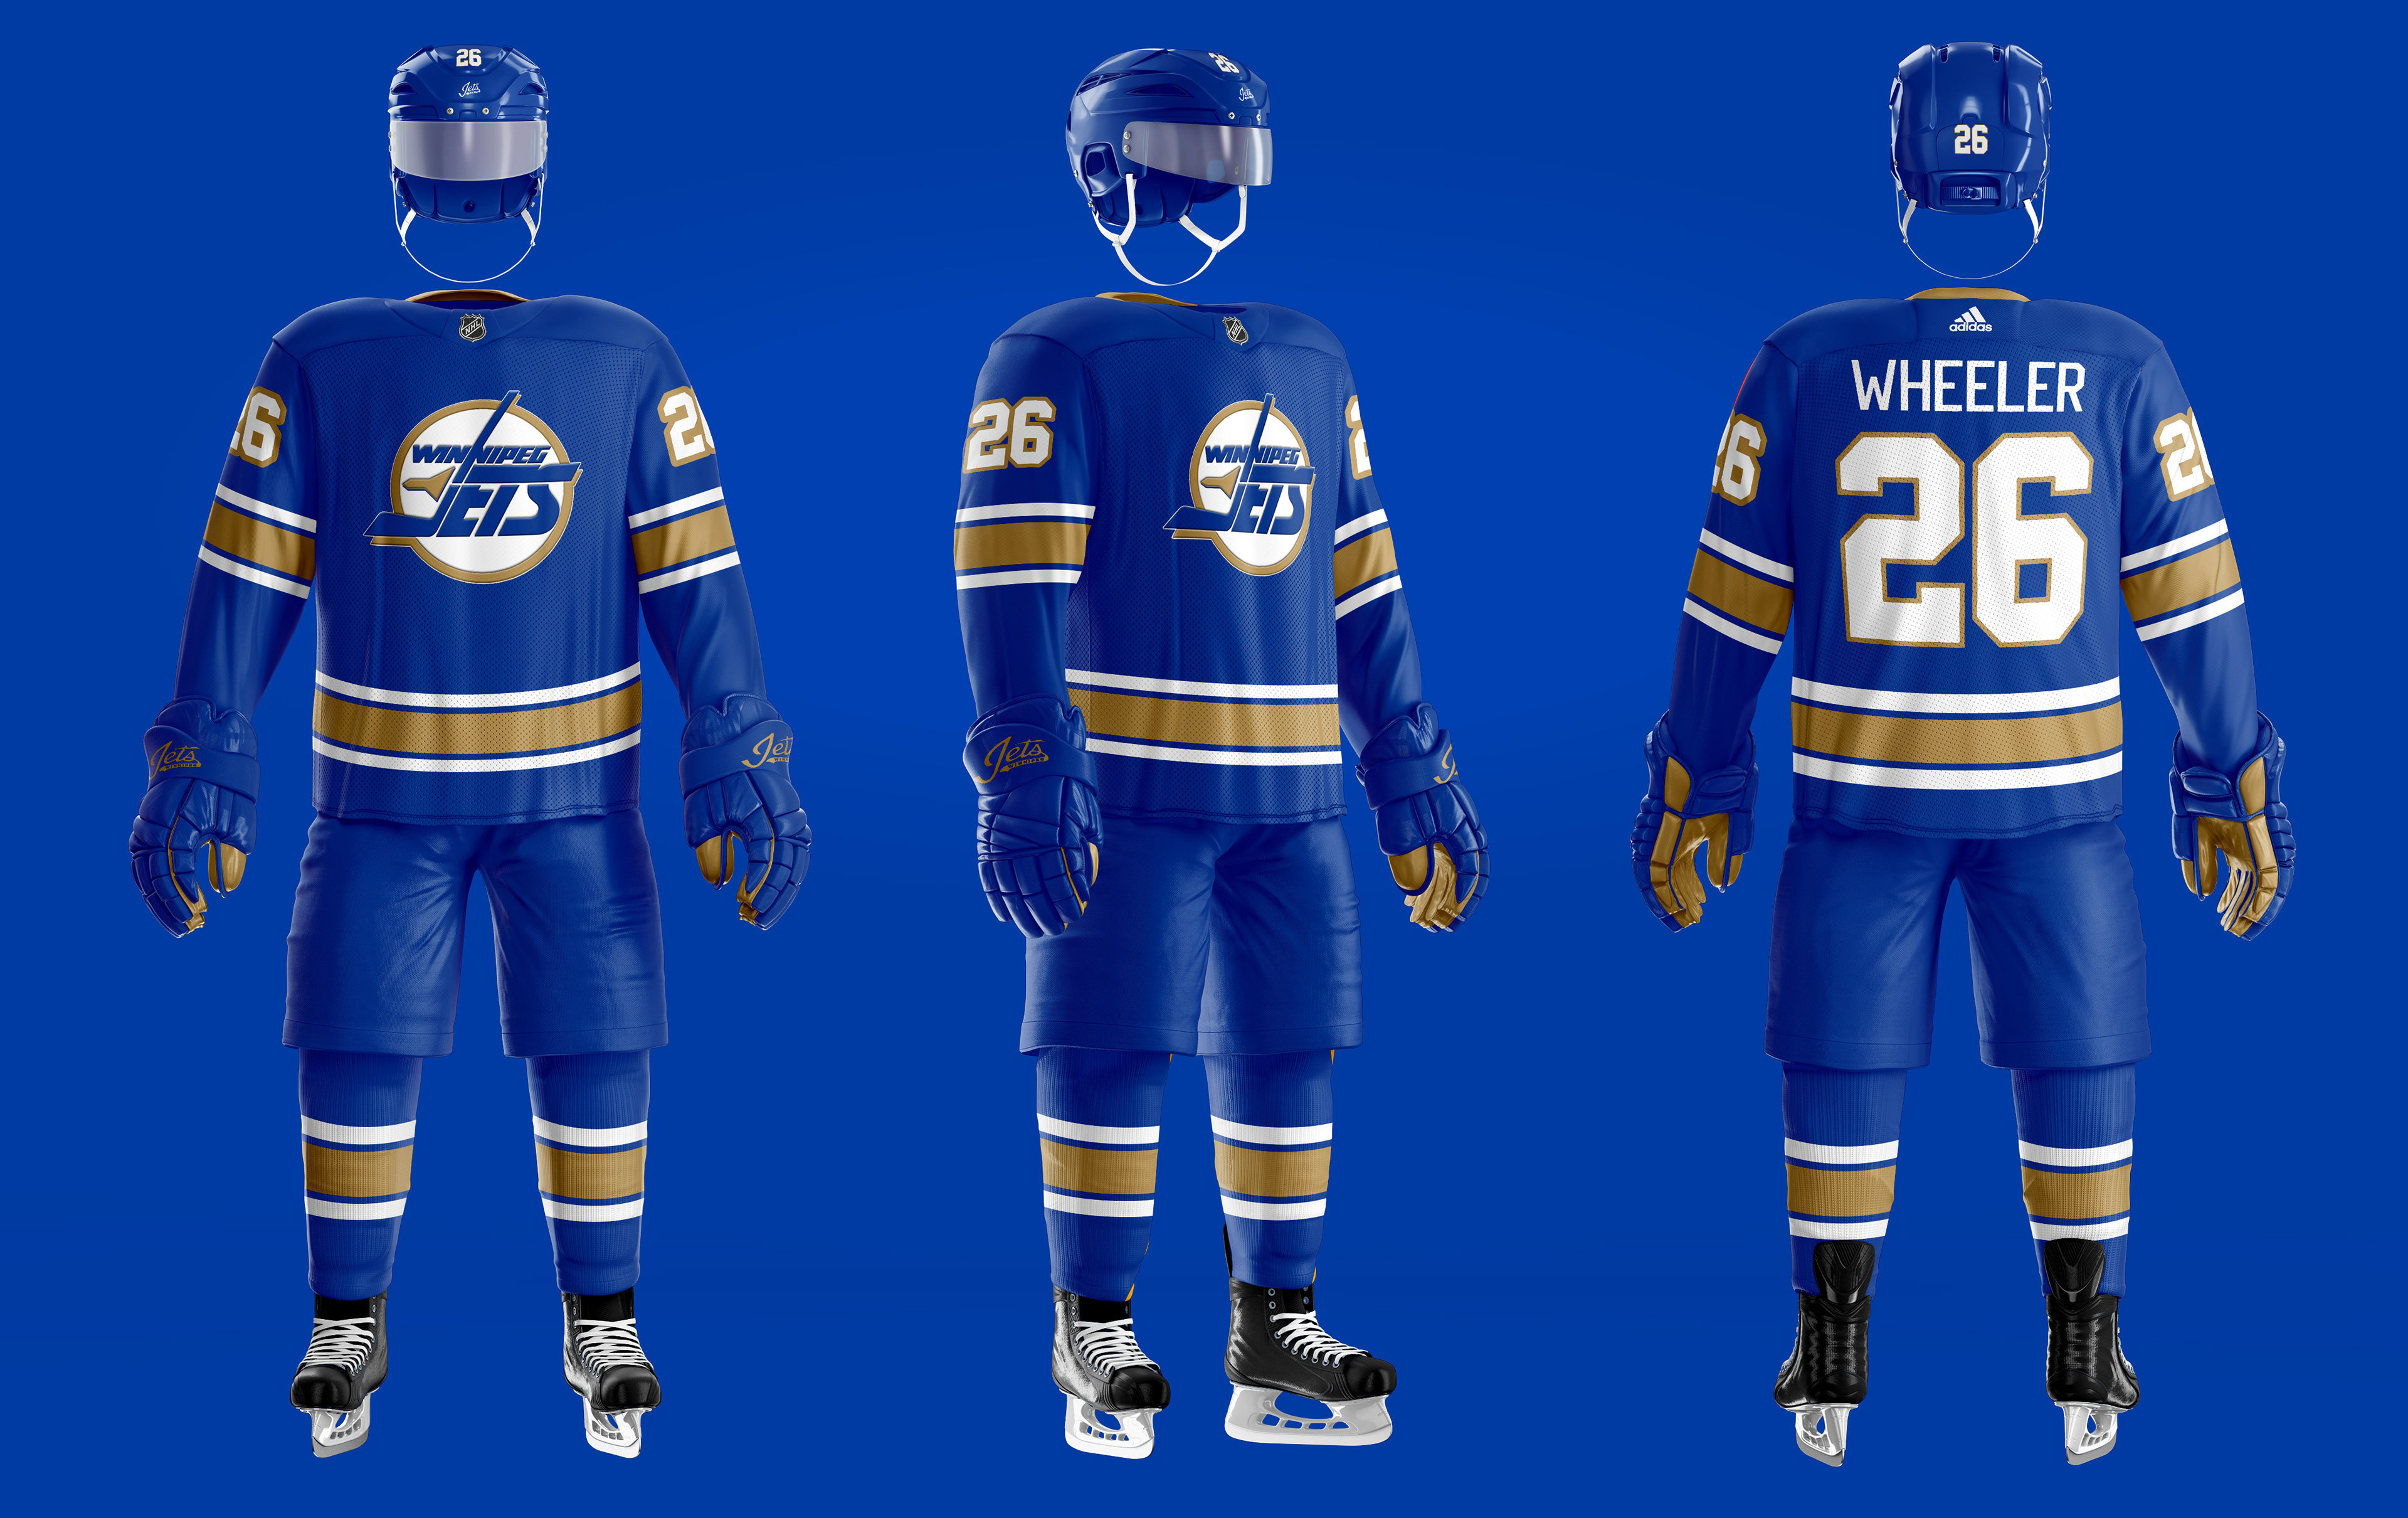 Made jersey concepts for each team as a little hobby, what do you think?  Eastern Conference : r/nhl